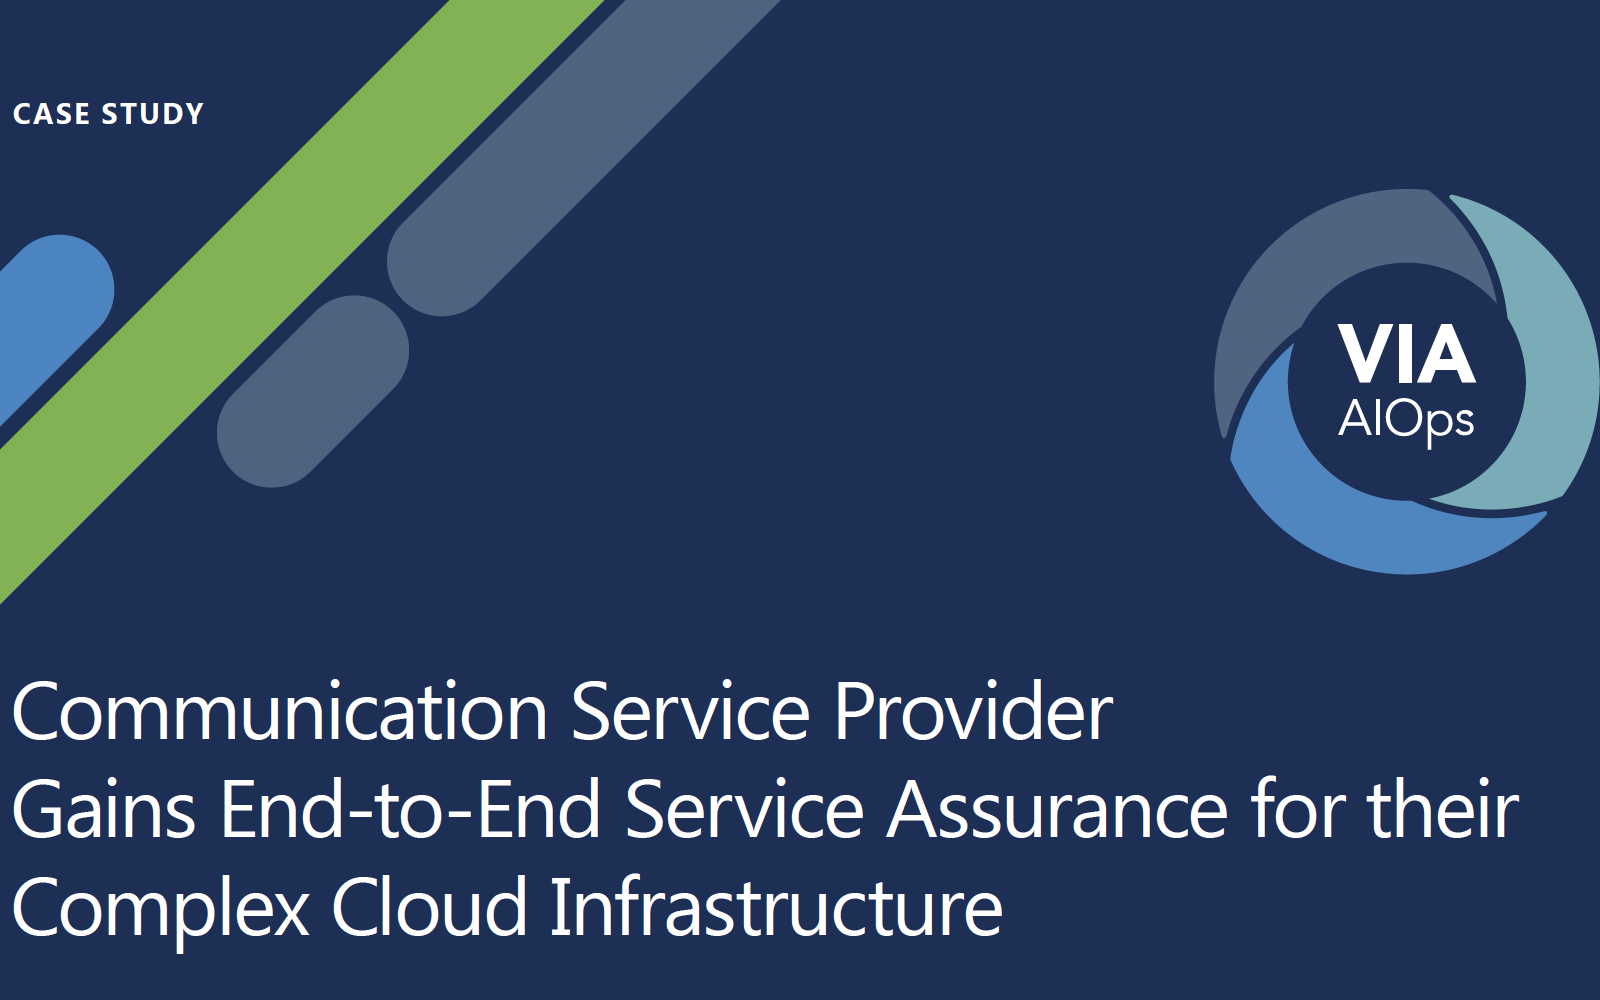 Communication Service Provider Gains End-to-End Service Assurance for their Complex Cloud Infrastructure